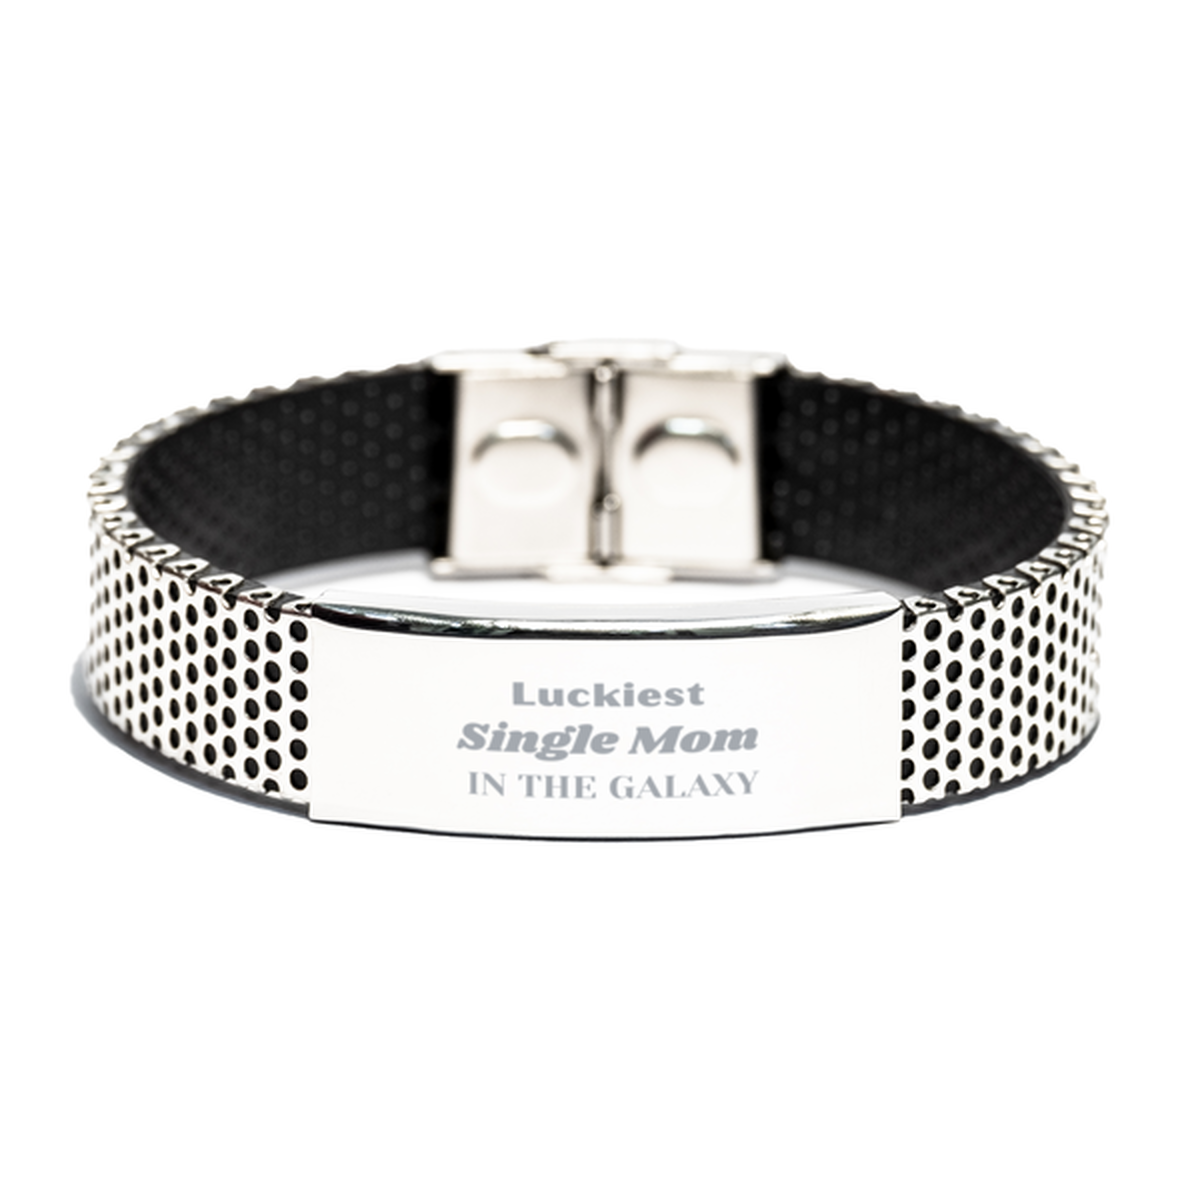 Luckiest Single Mom in the Galaxy, To My Single Mom Engraved Gifts, Christmas Single Mom Stainless Steel Bracelet Gifts, X-mas Birthday Unique Gifts For Single Mom Men Women